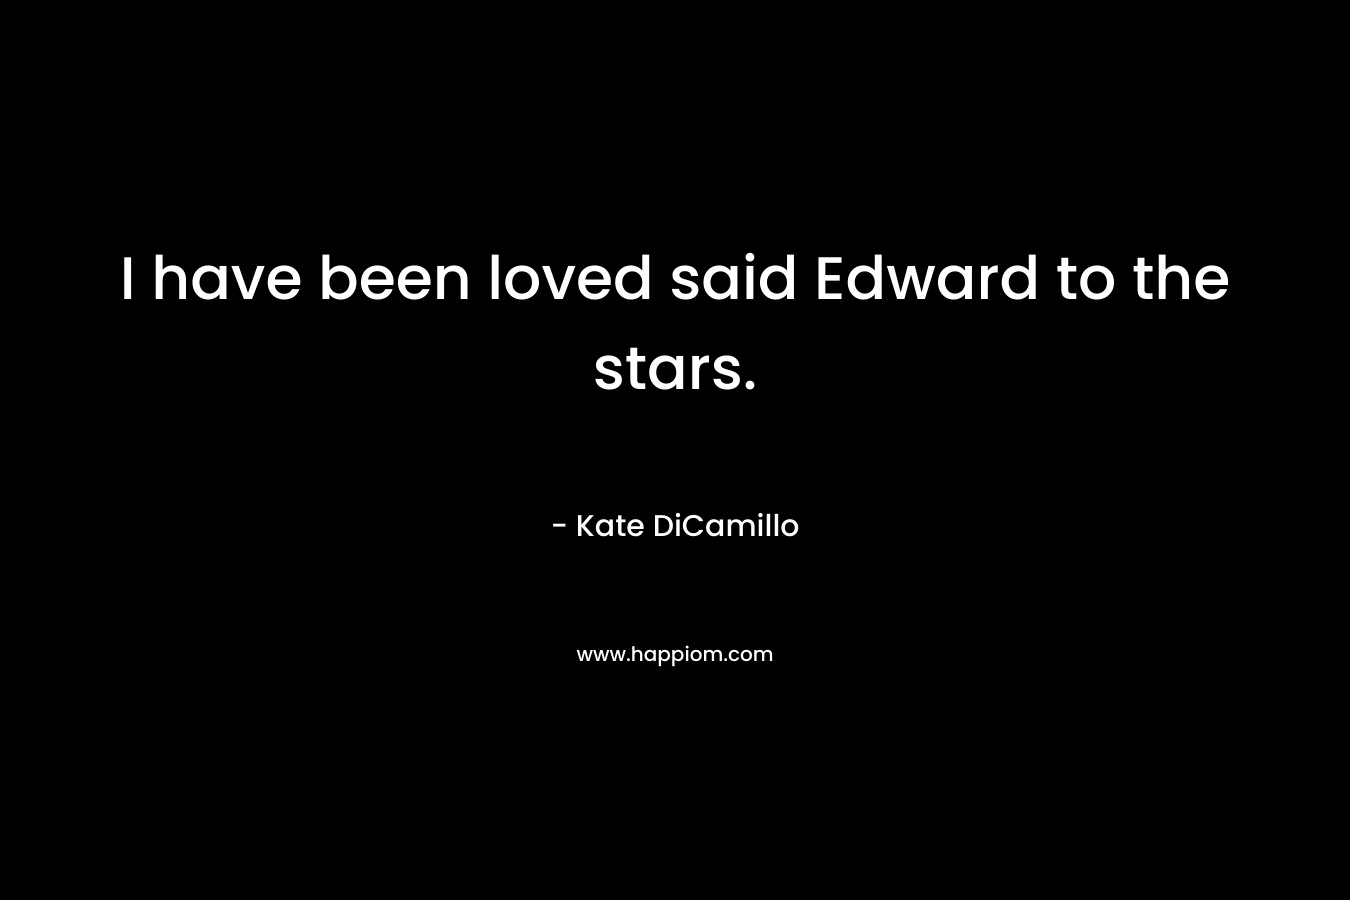 I have been loved said Edward to the stars.